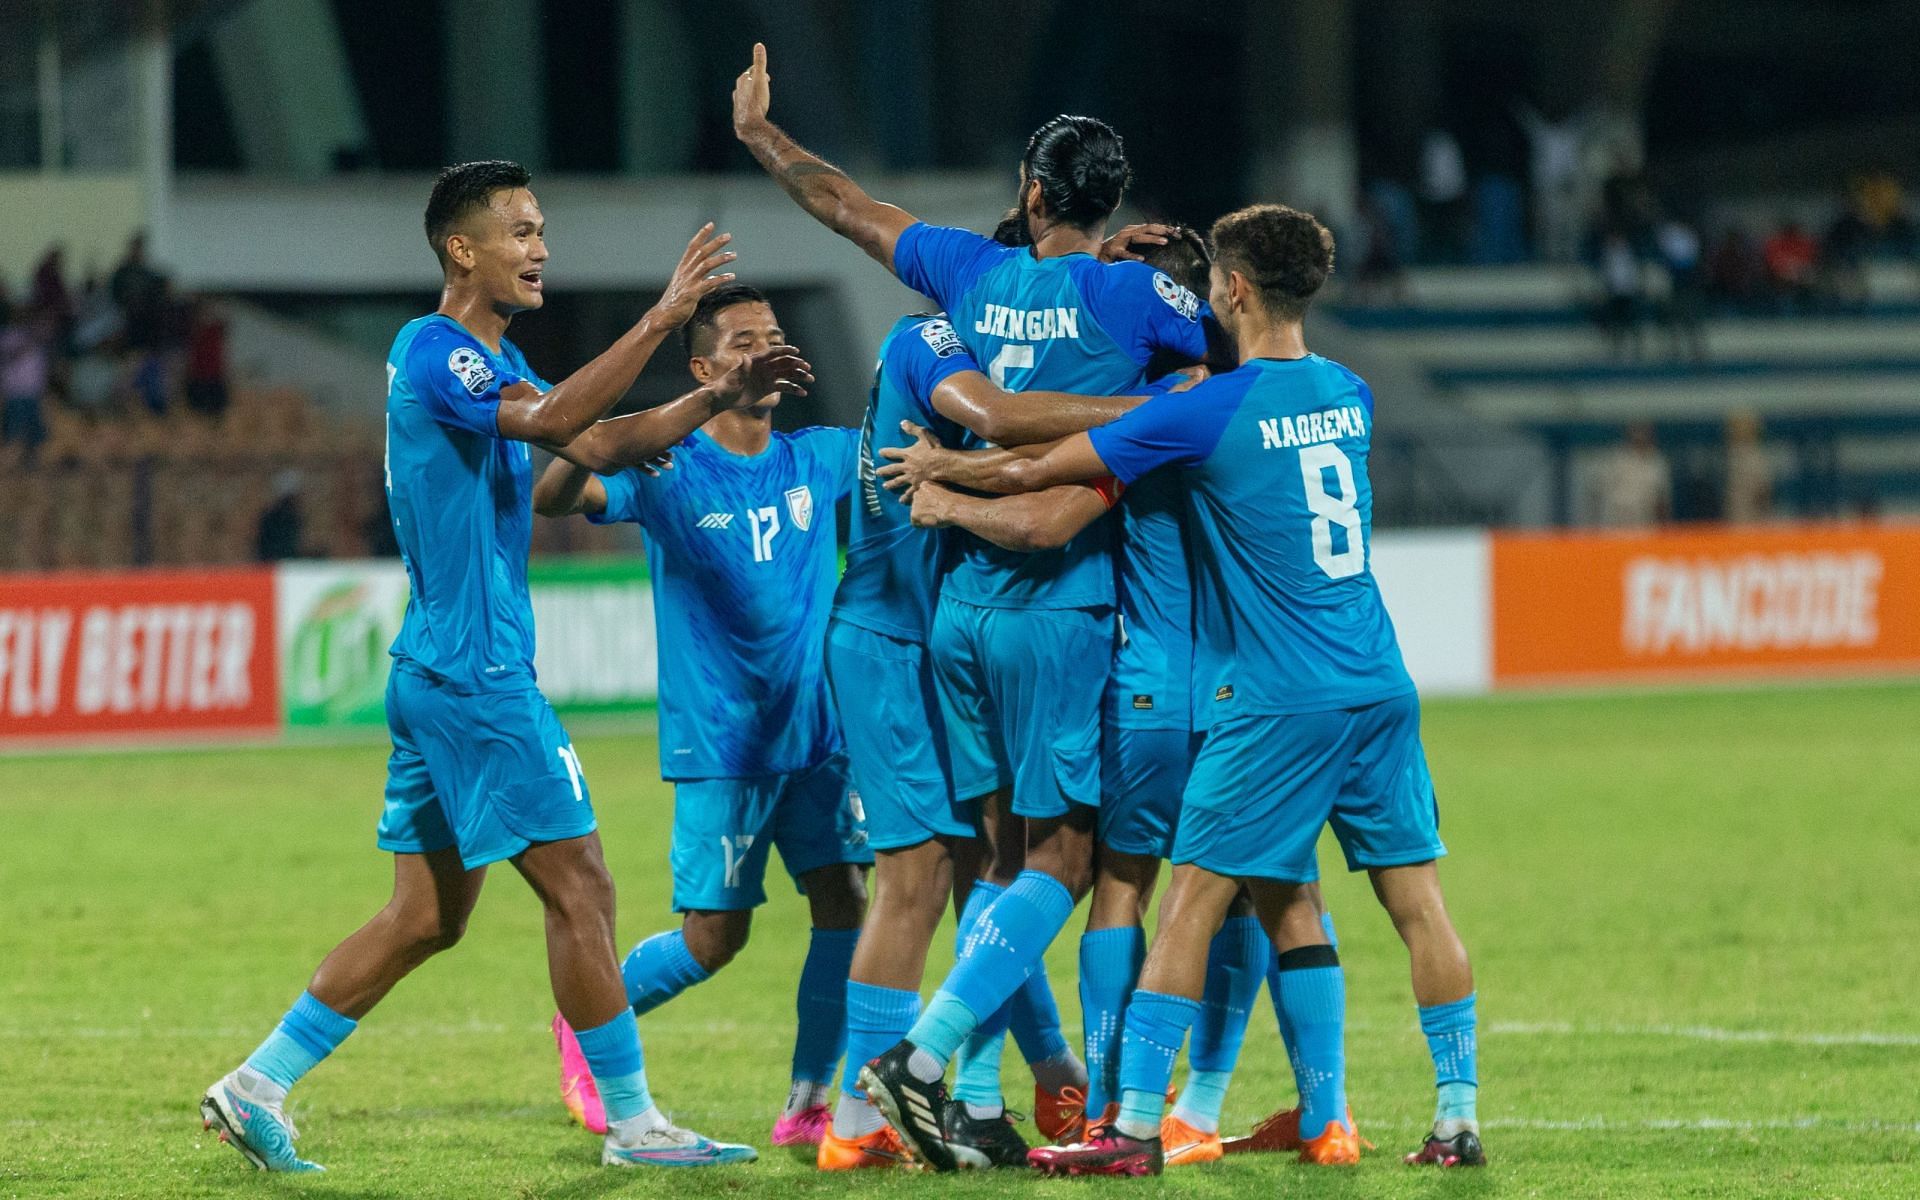 India won on penalties in the SAFF Championship semi-final against Lebanon.